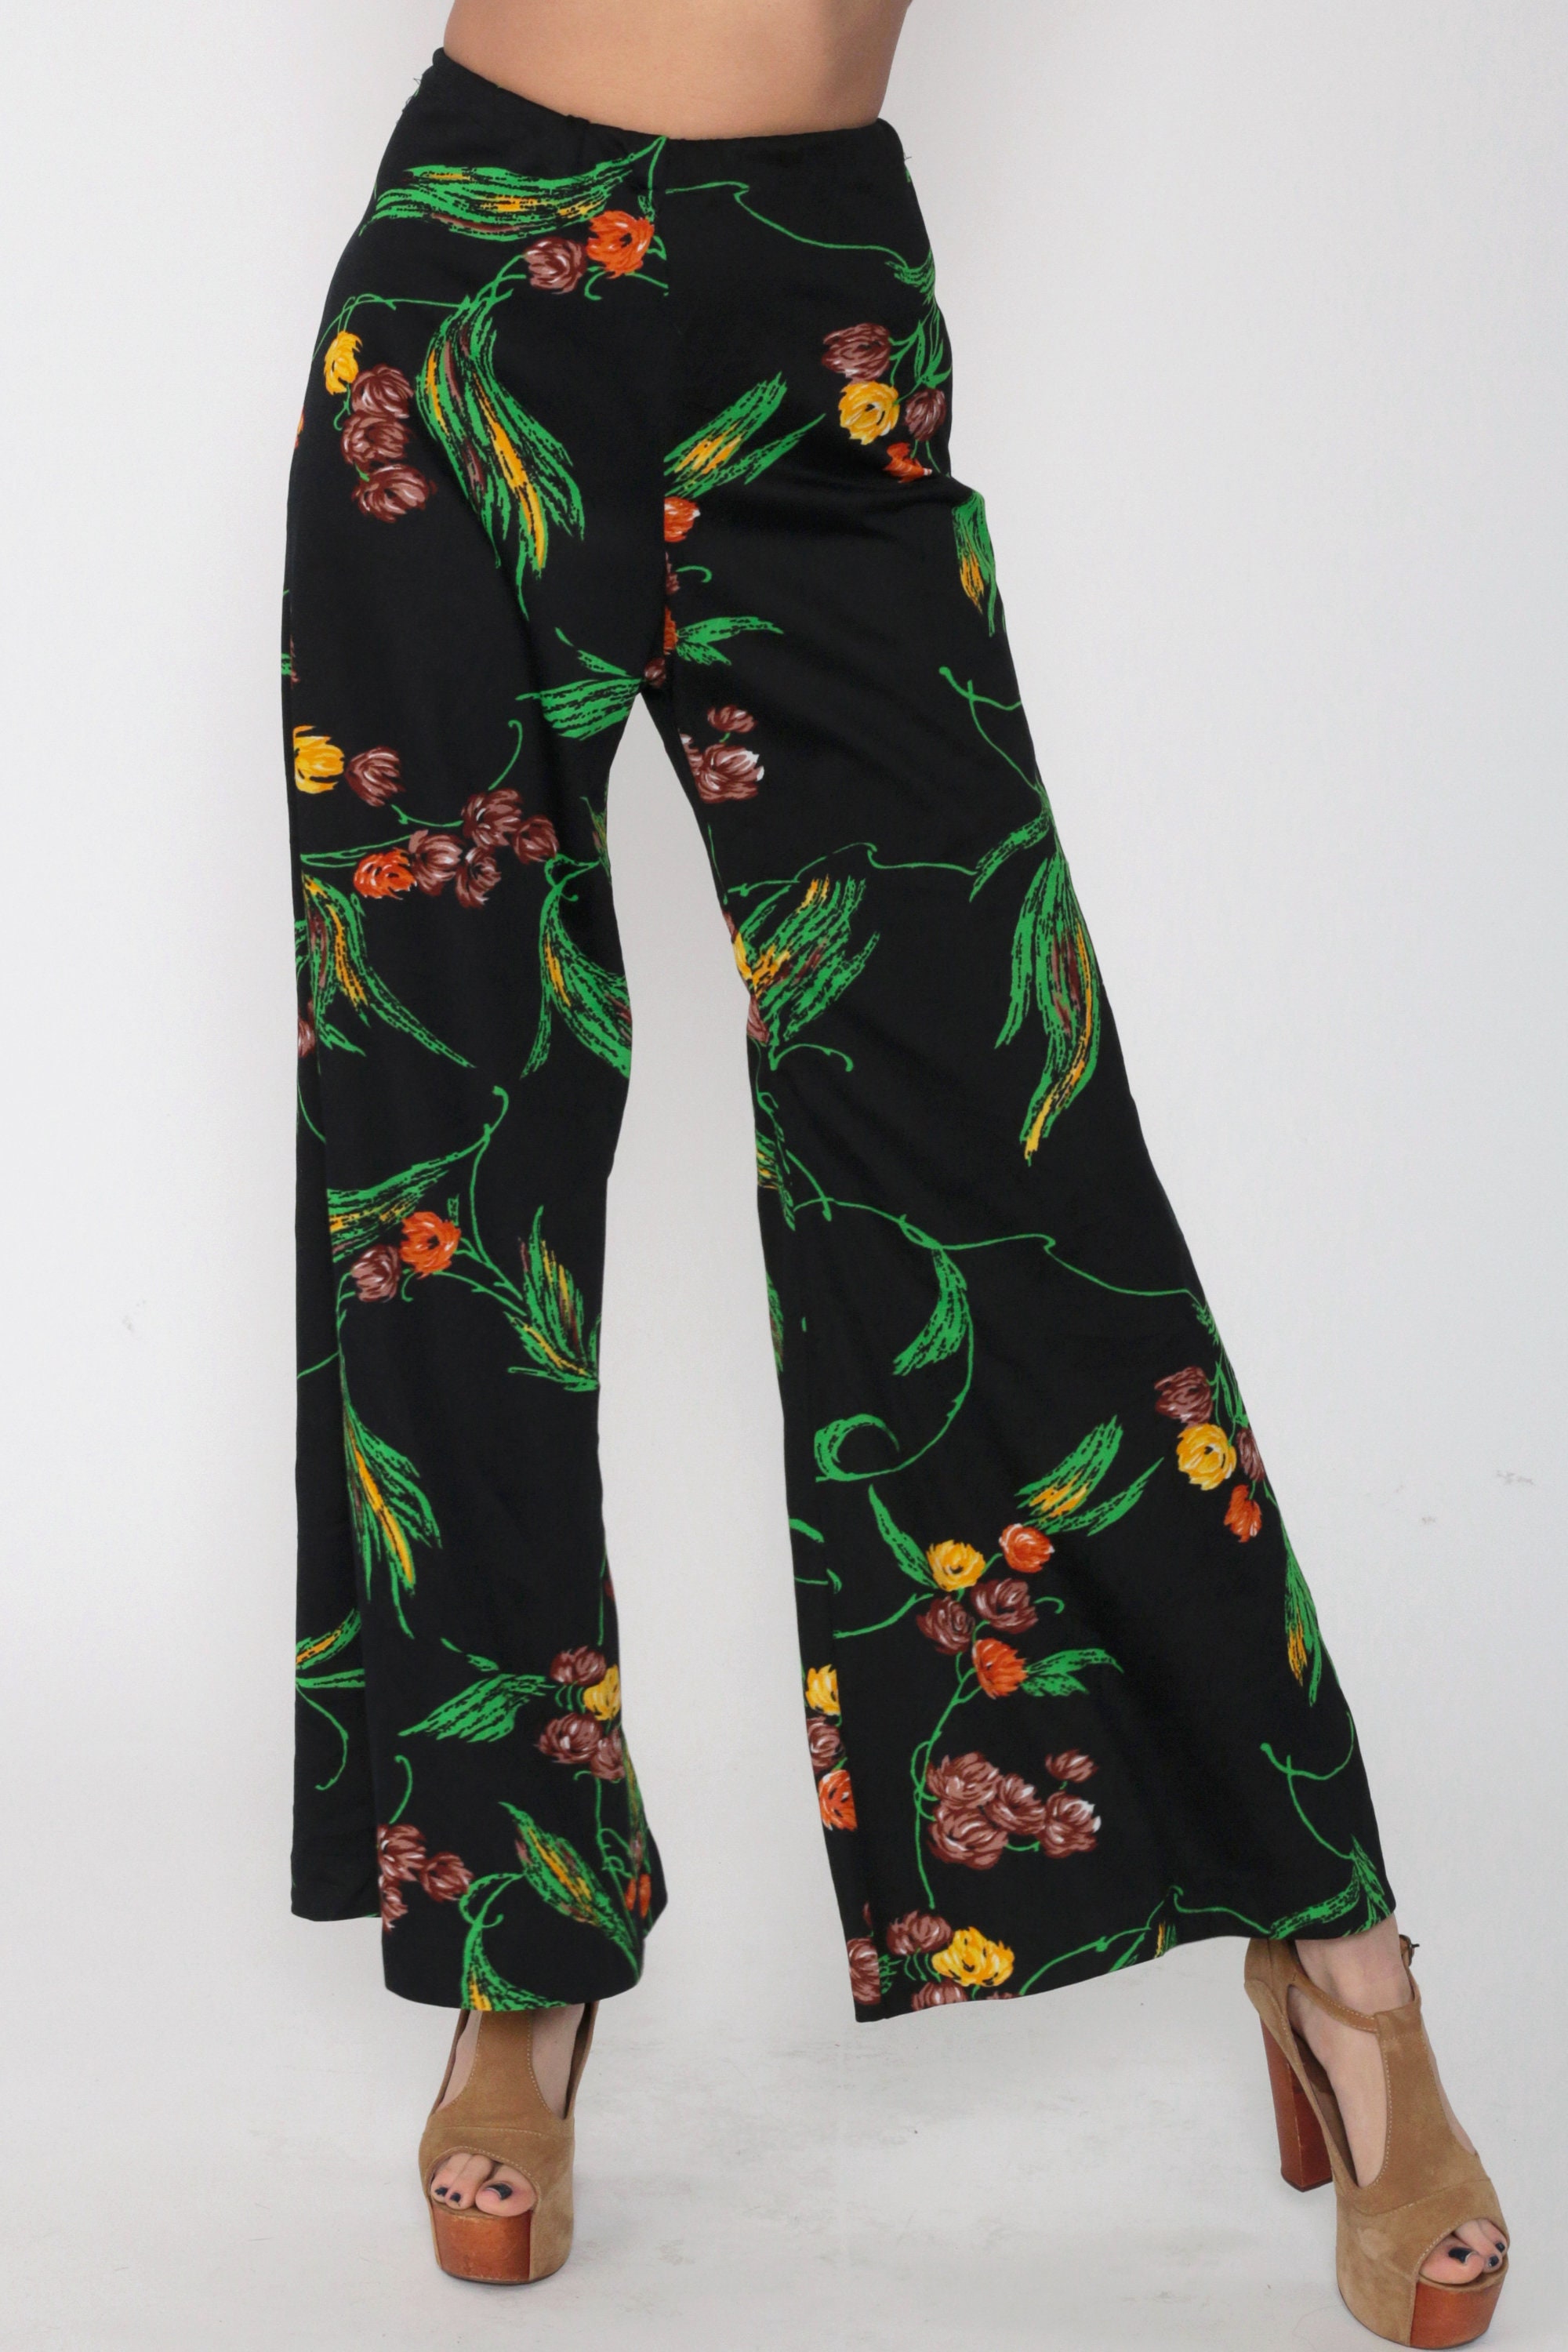 Floral Bell Bottom Pants PALAZZO Pants Bohemian 70s PSYCHEDELIC Hippie ...